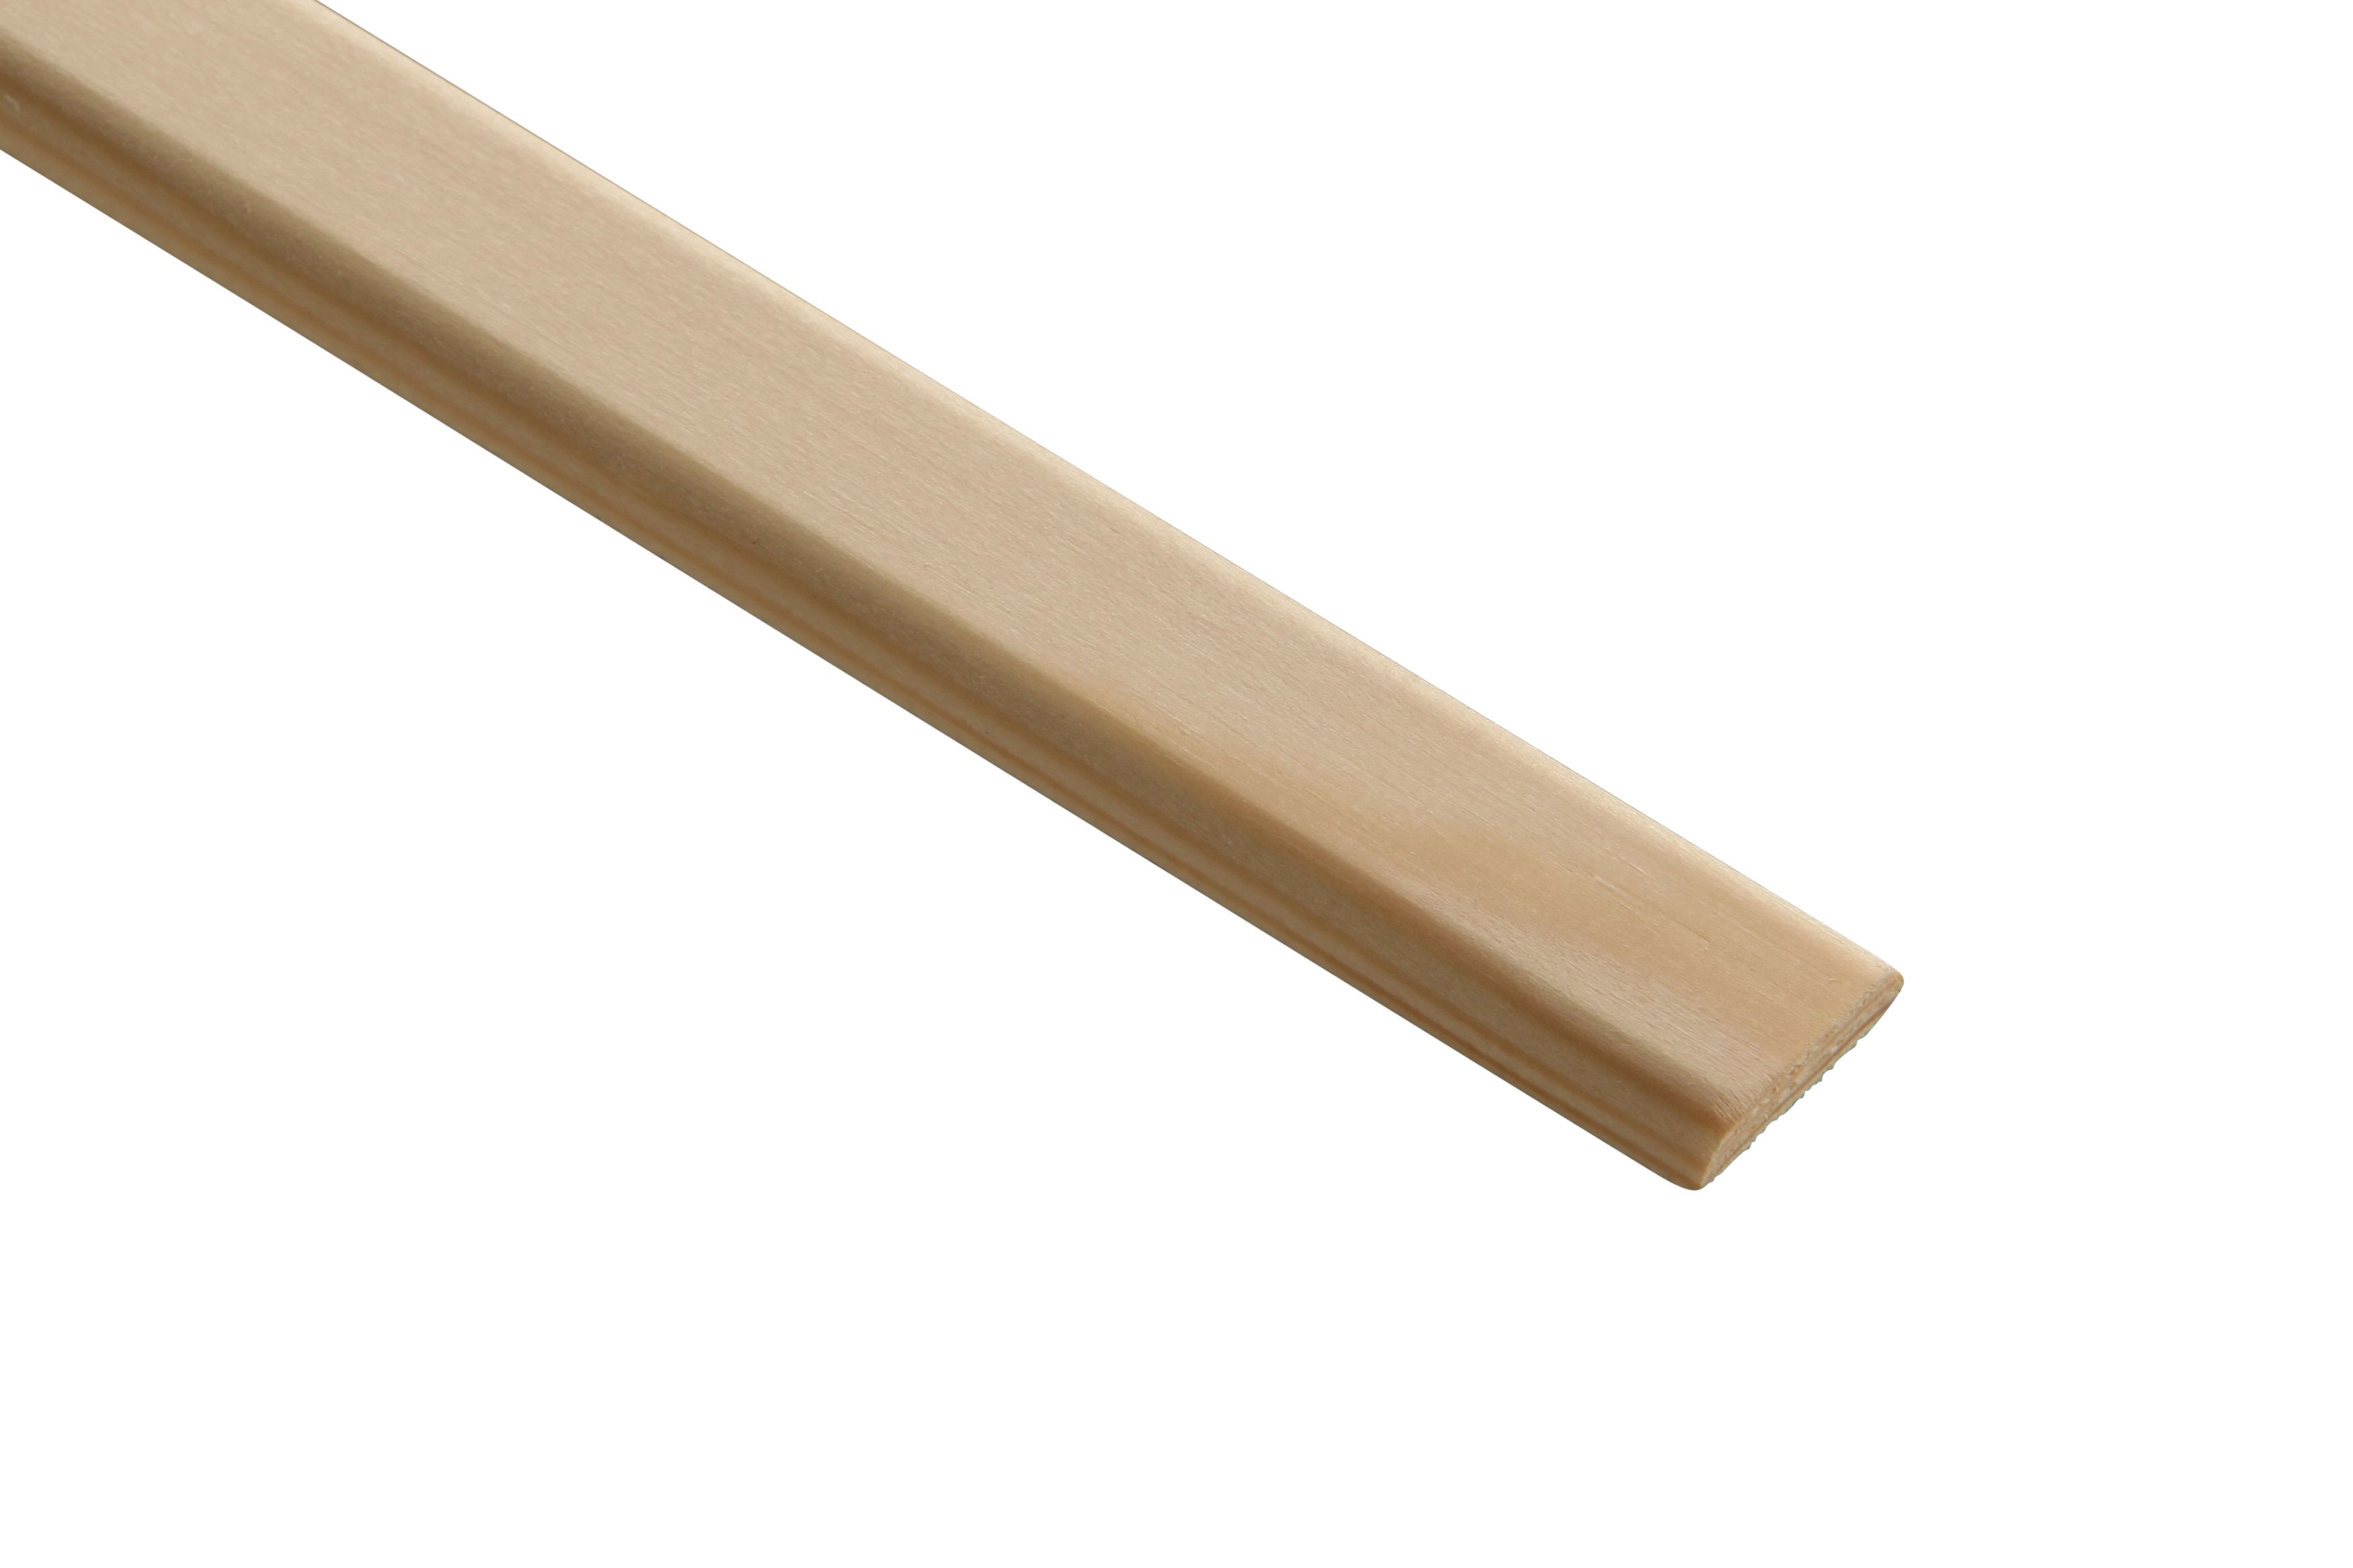 Image of Wickes Pine D-shape Moulding - 16 x 4 x 2400mm